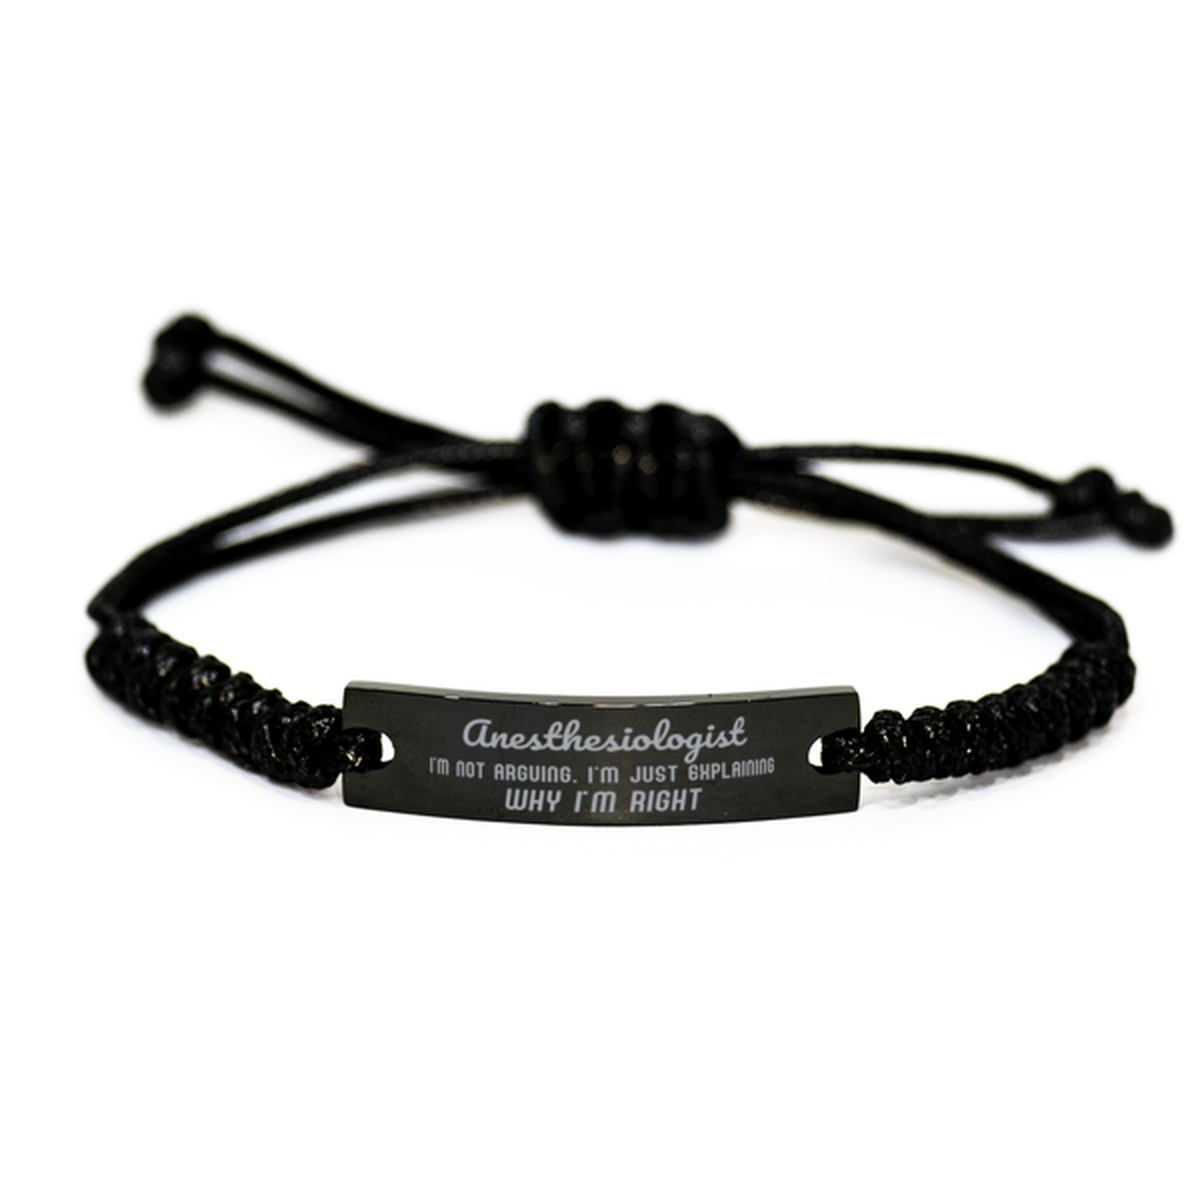 Anesthesiologist I'm not Arguing. I'm Just Explaining Why I'm RIGHT Black Rope Bracelet, Funny Saying Quote Anesthesiologist Gifts For Anesthesiologist Graduation Birthday Christmas Gifts for Men Women Coworker